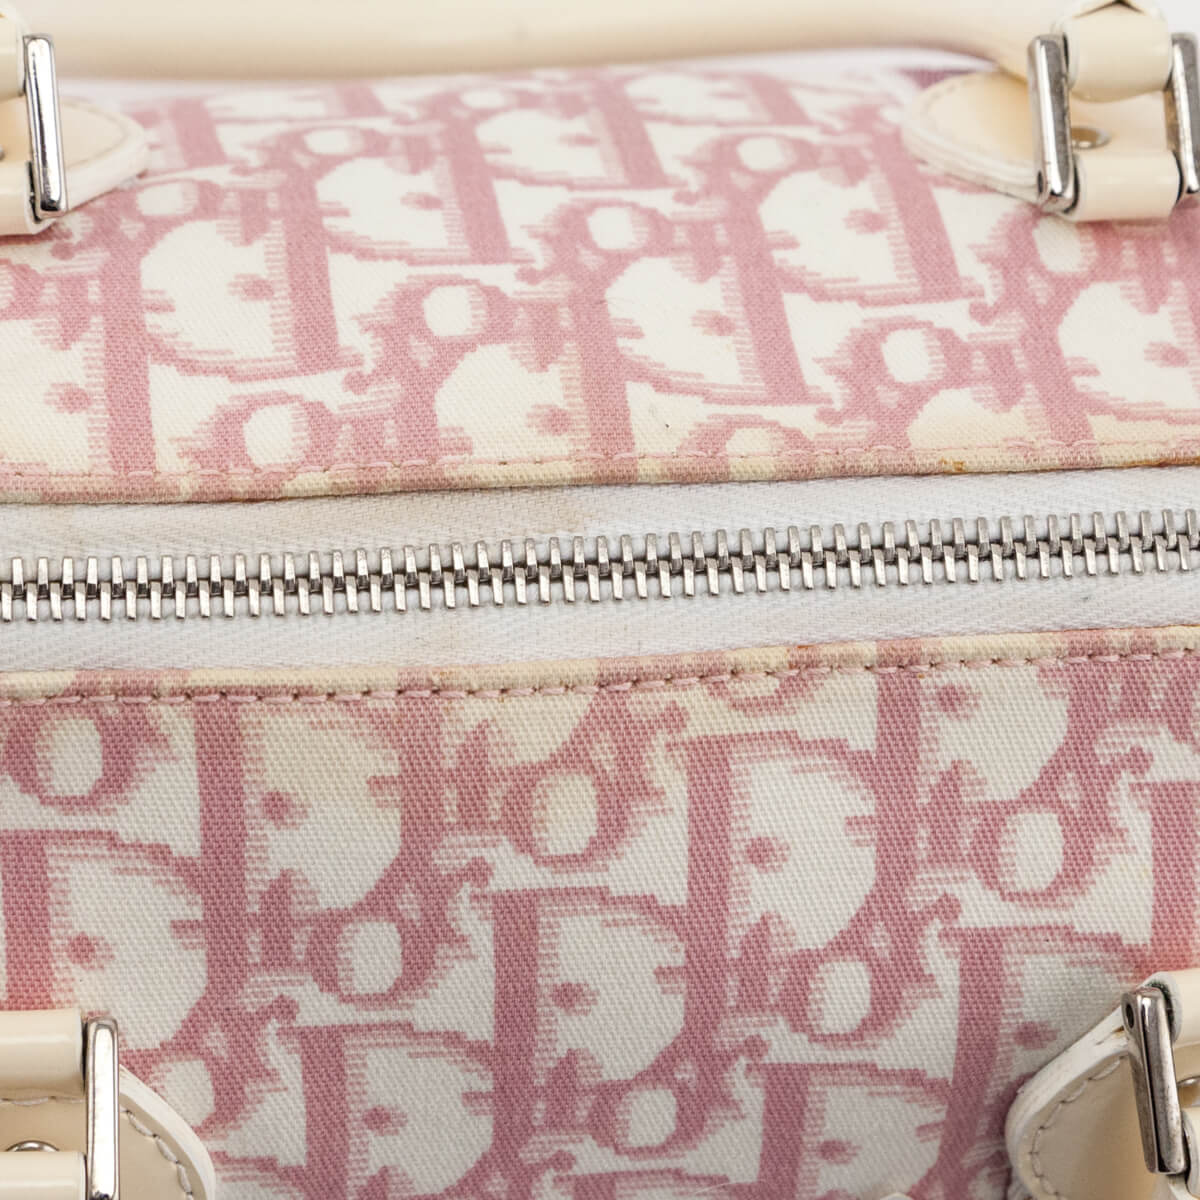 Authentic CHRISTIAN DIOR boston bag pink/ white colour, in Fulham, London